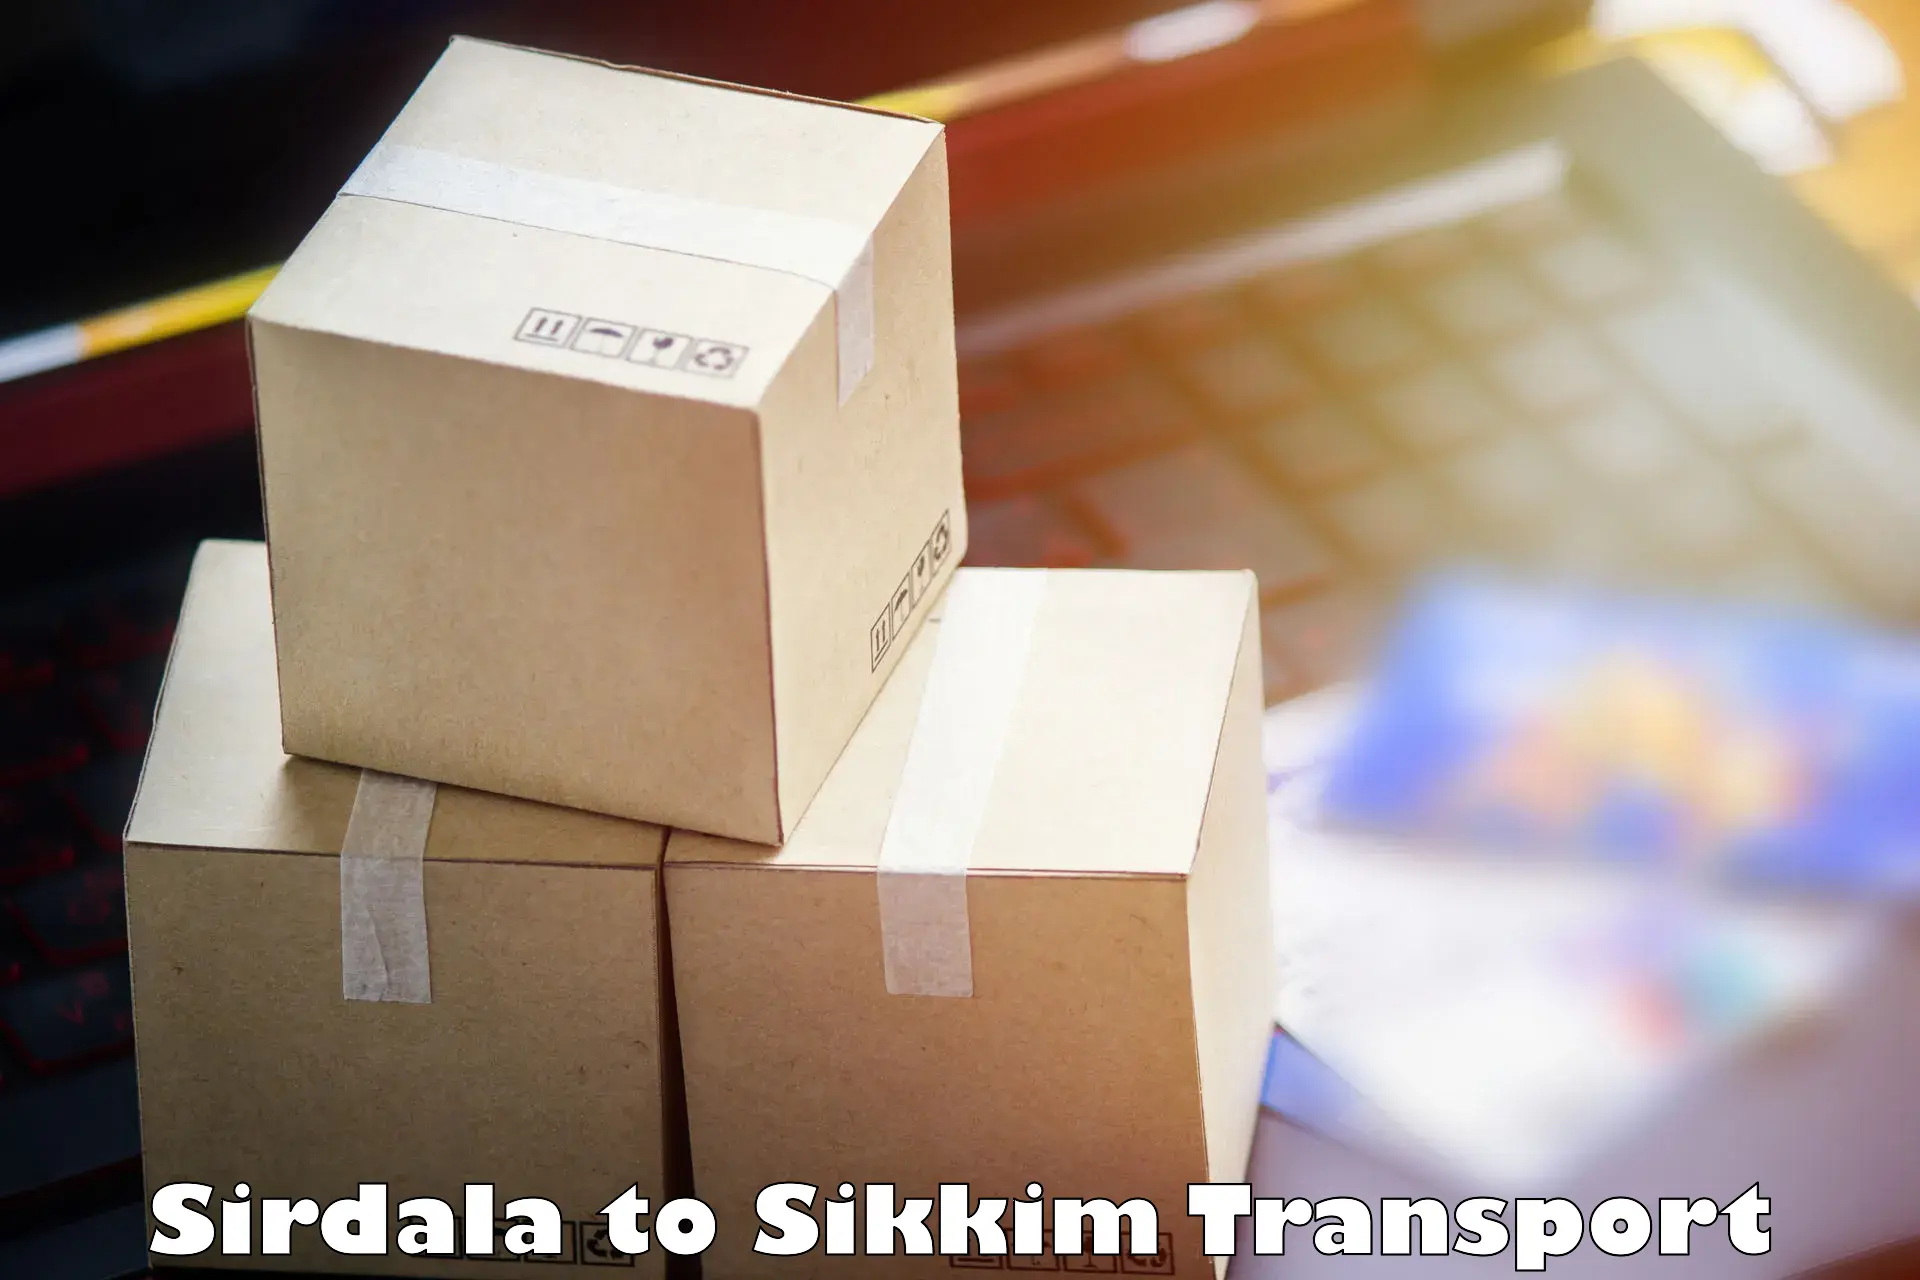 Delivery service Sirdala to North Sikkim